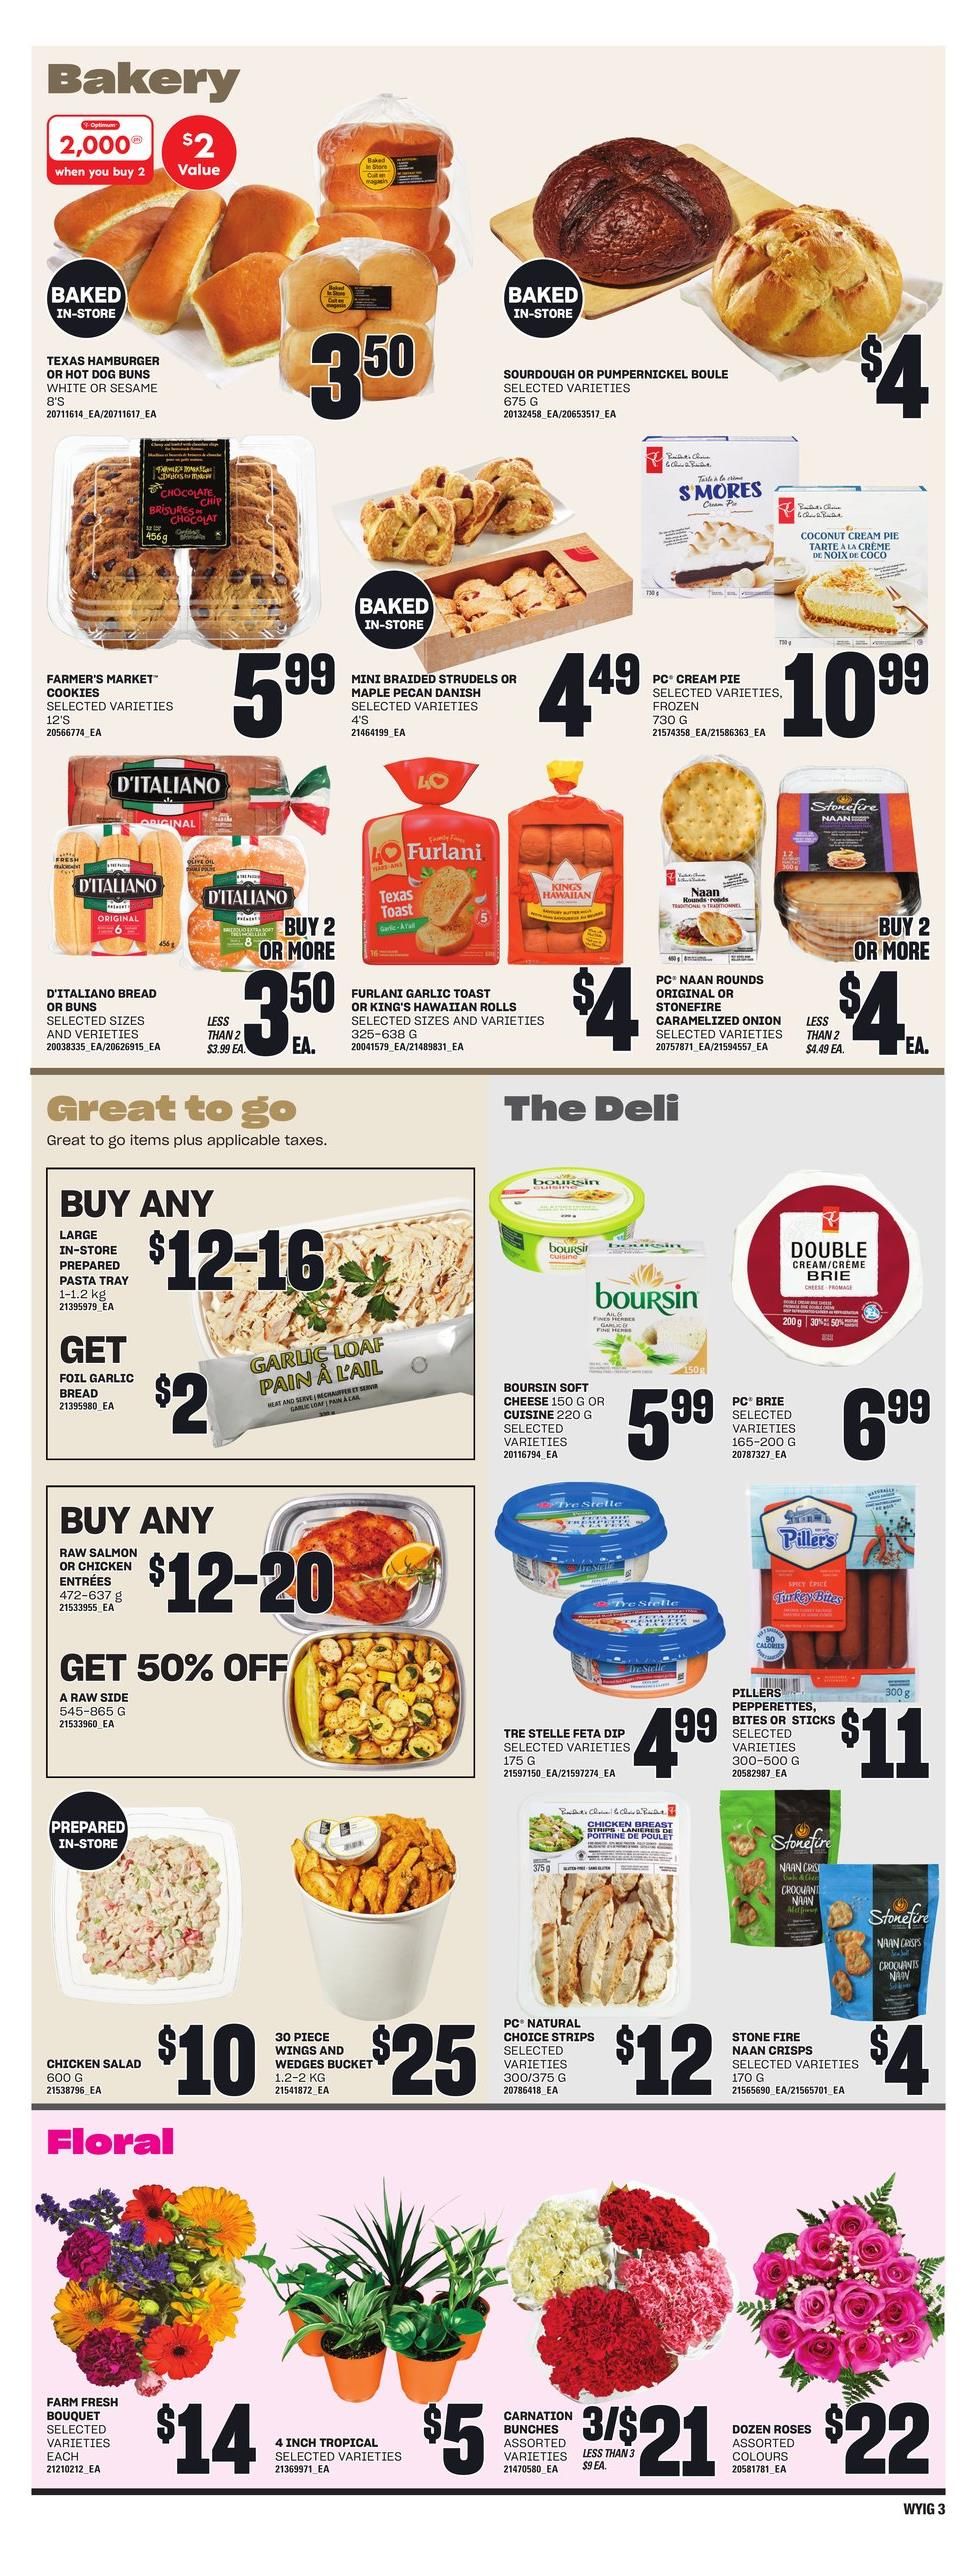 Independent - Western Canada - Weekly Flyer Specials - Page 5